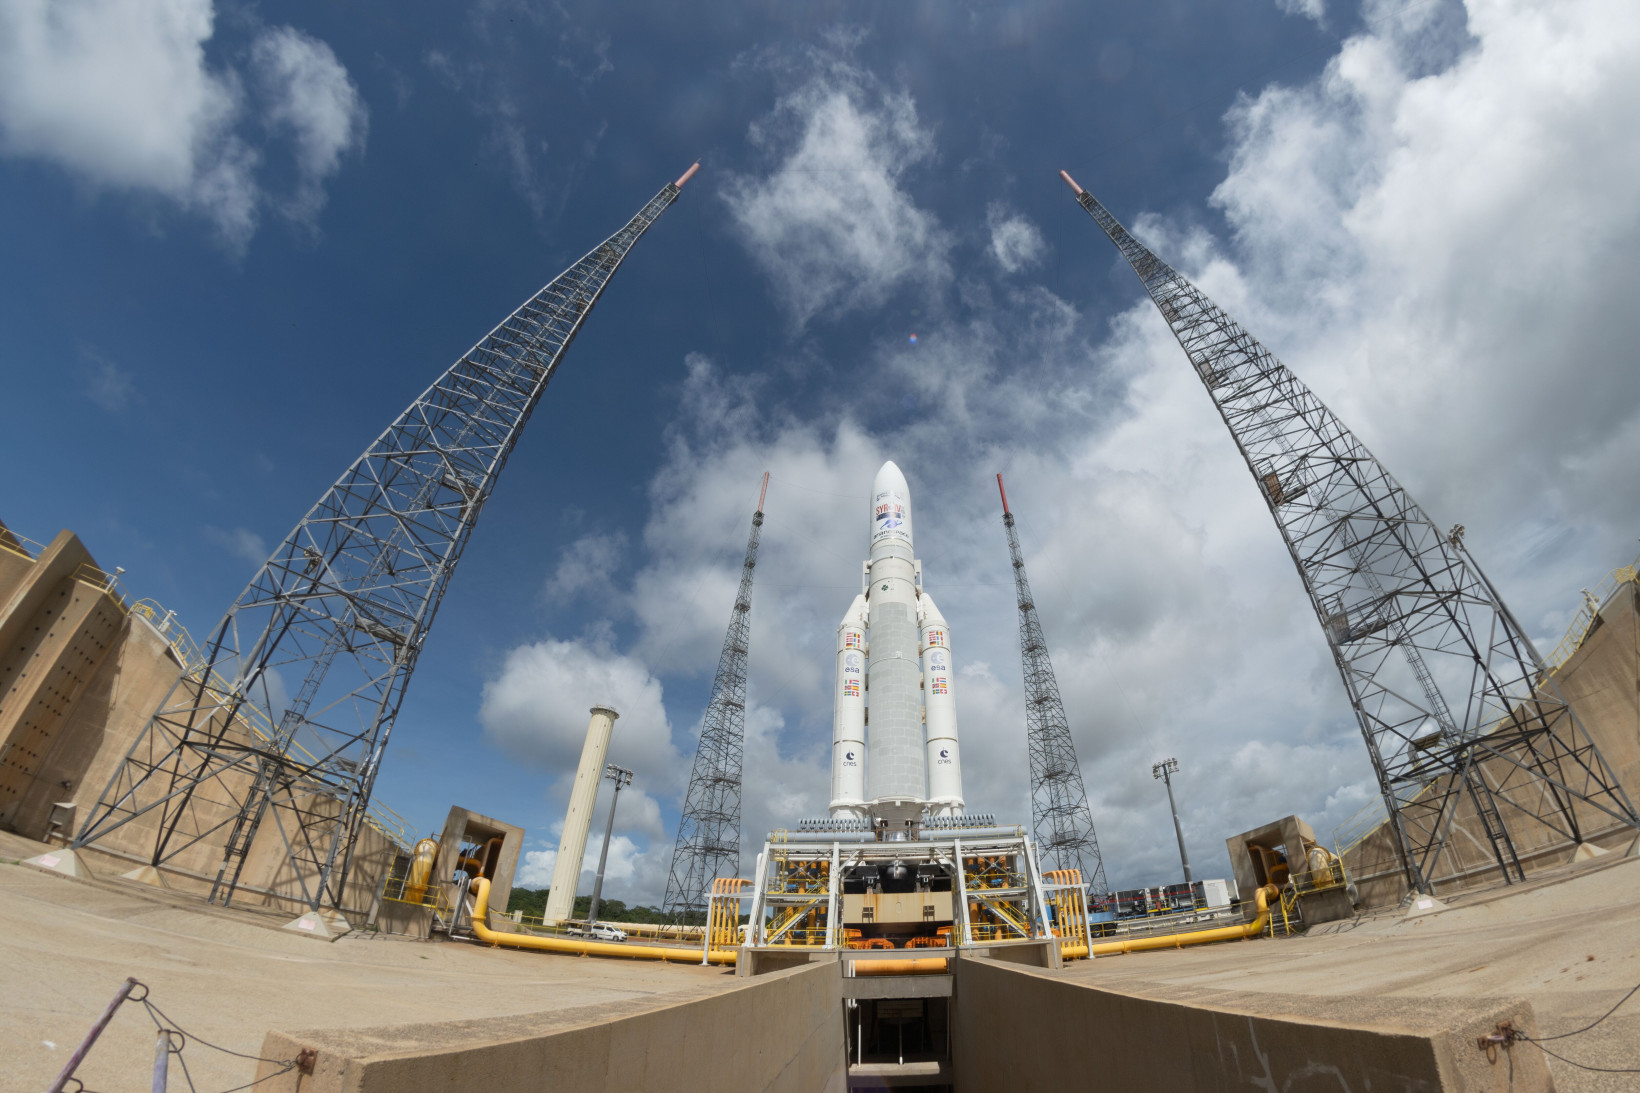 Ariane 5 rolled out to launch pad